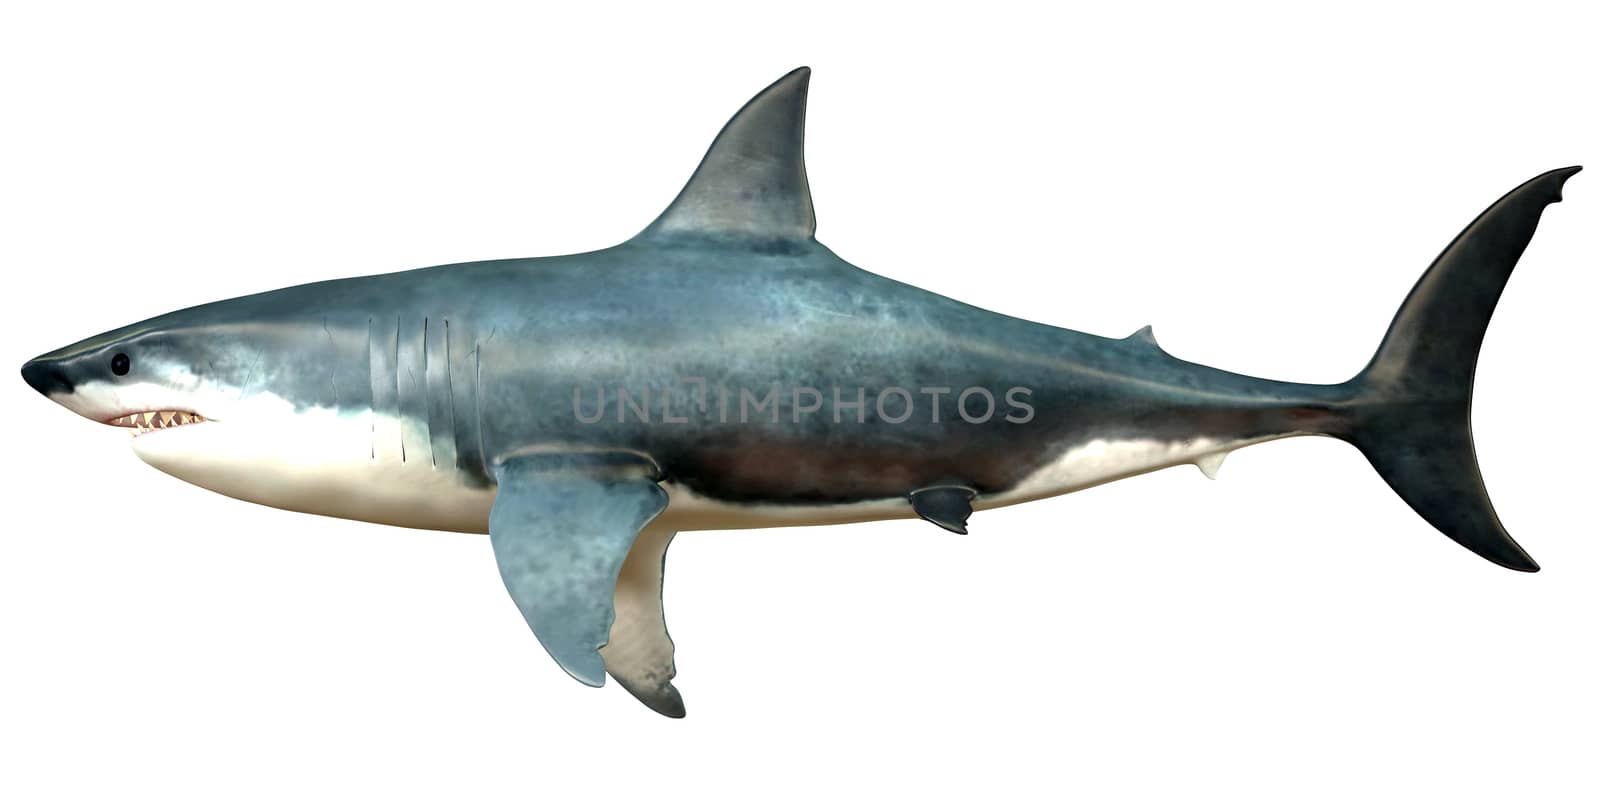 Megalodon is an extinct species of shark that grew to 18 meters or 59ft and lived in the Cenozoic Era.